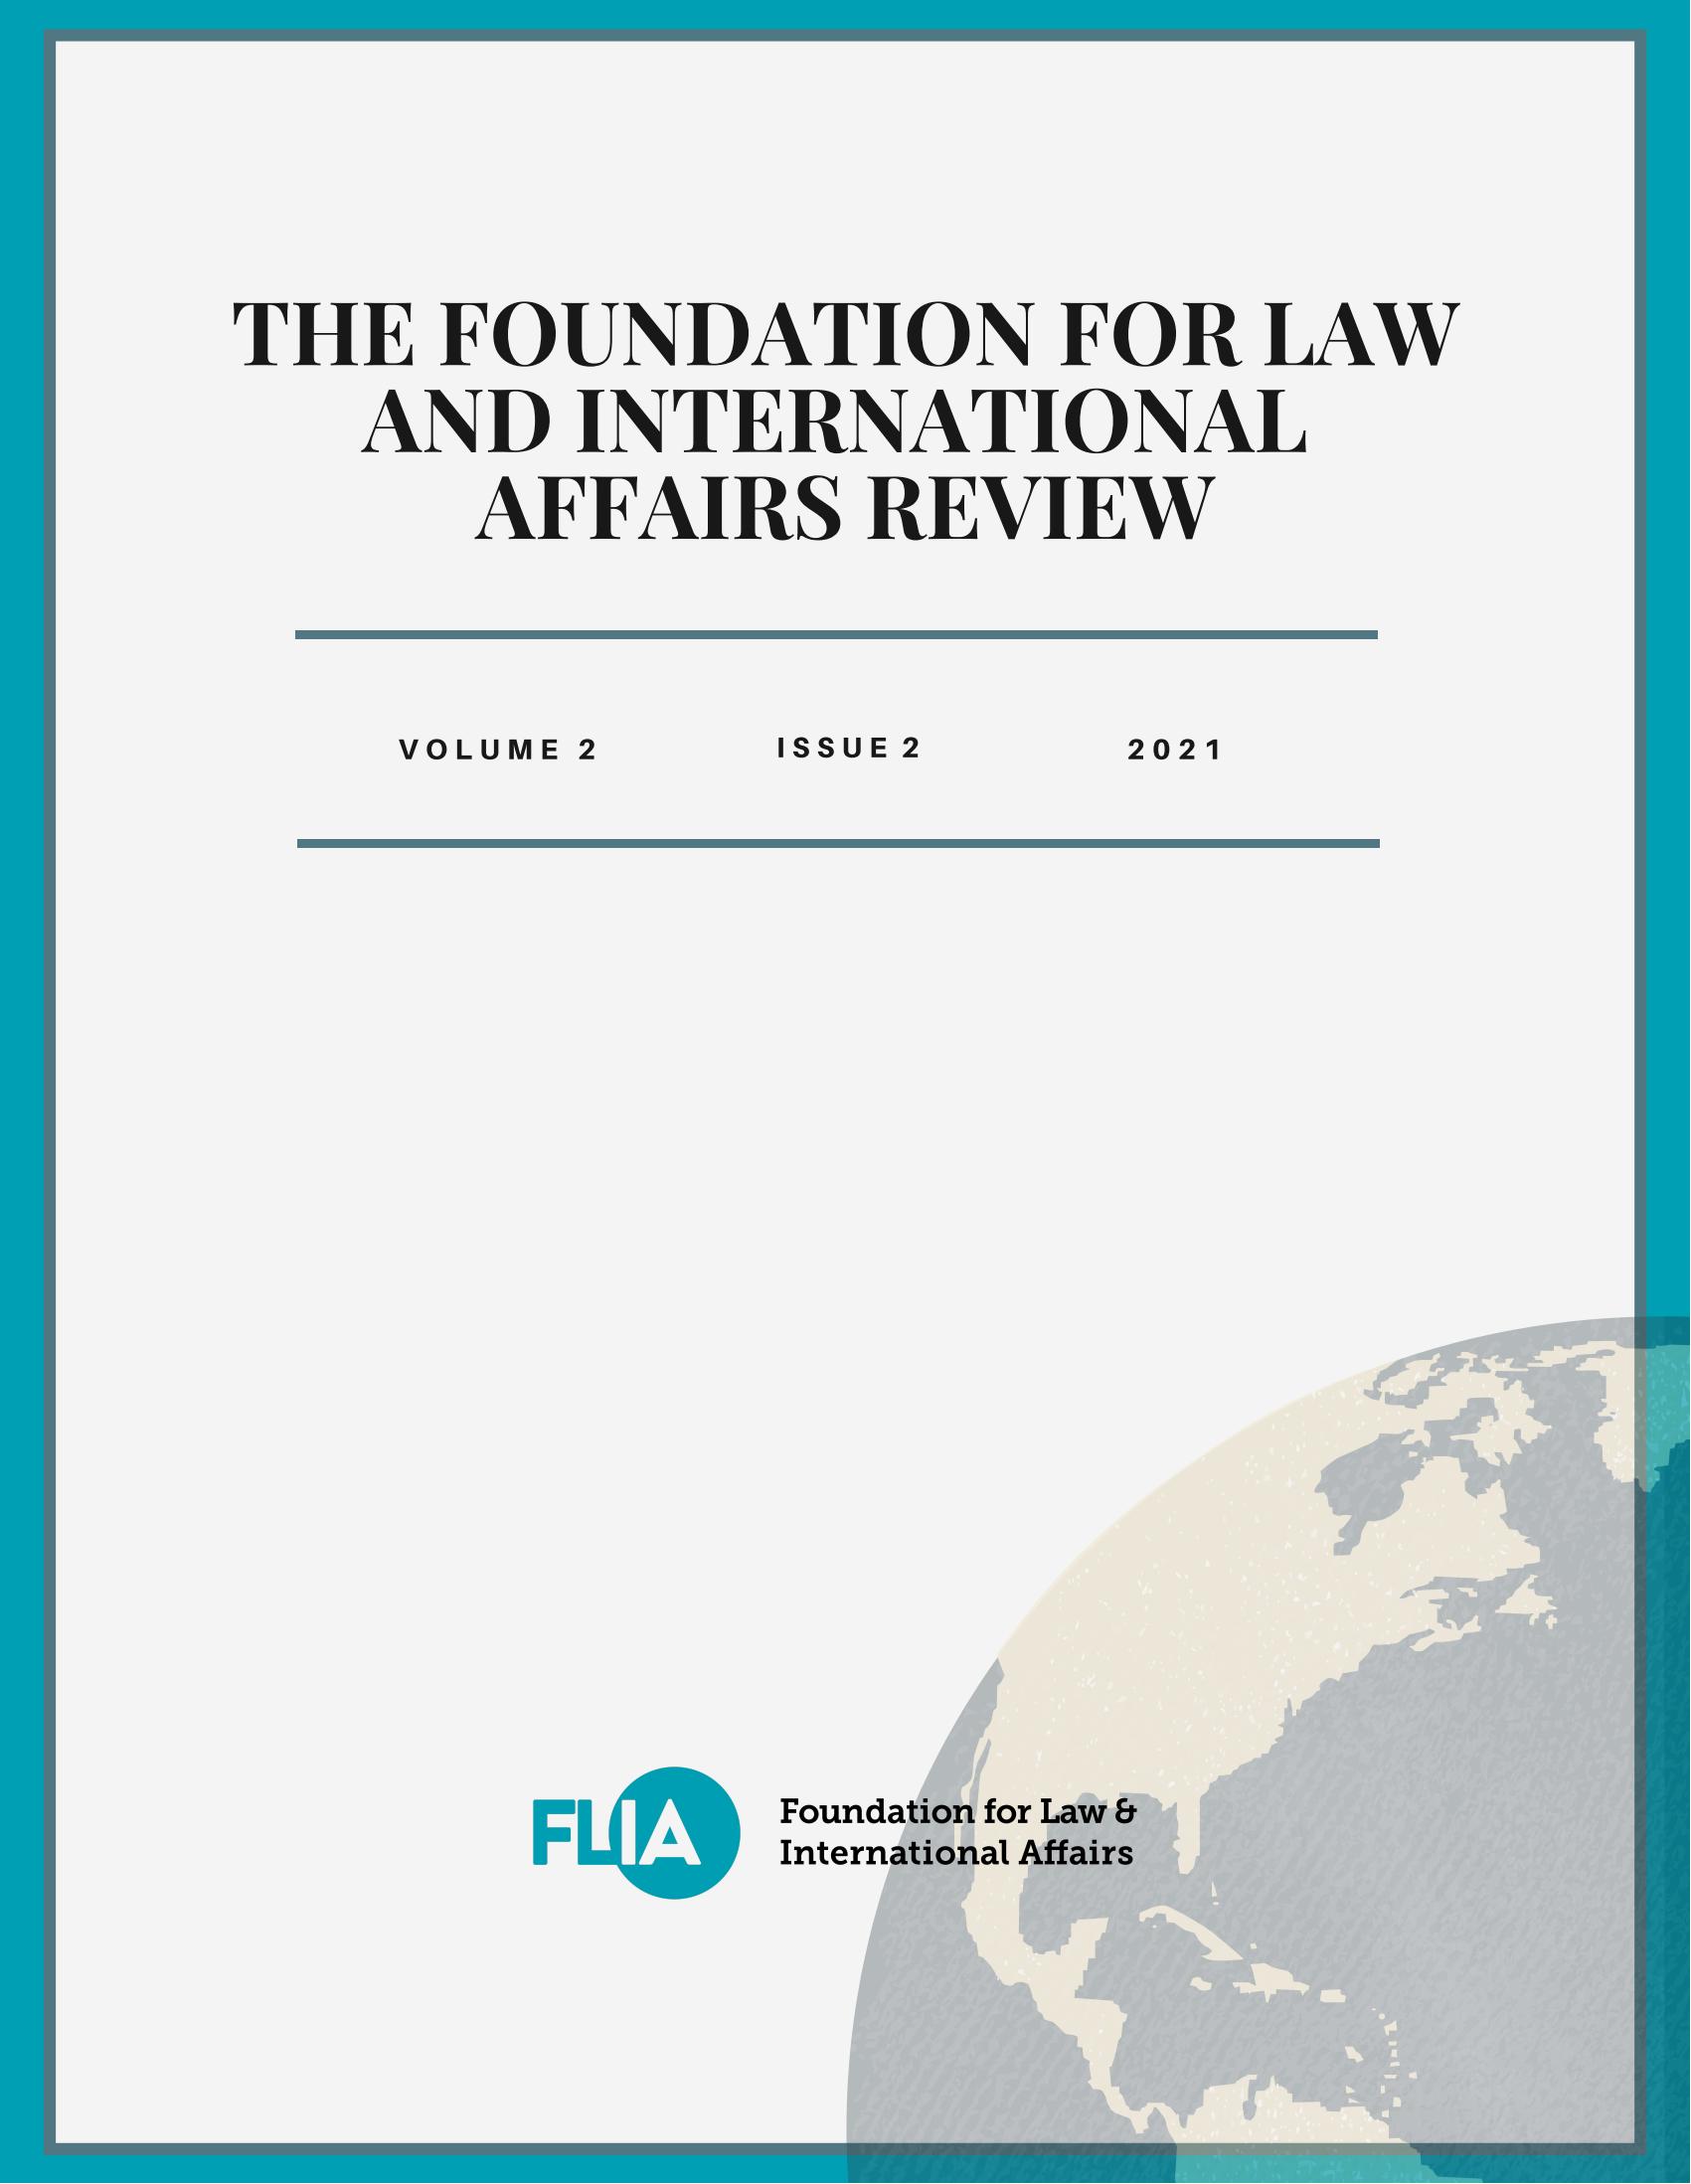 Foundation for Law and International Affairs Review Volume 2 Issue 2 2021_00.jpg